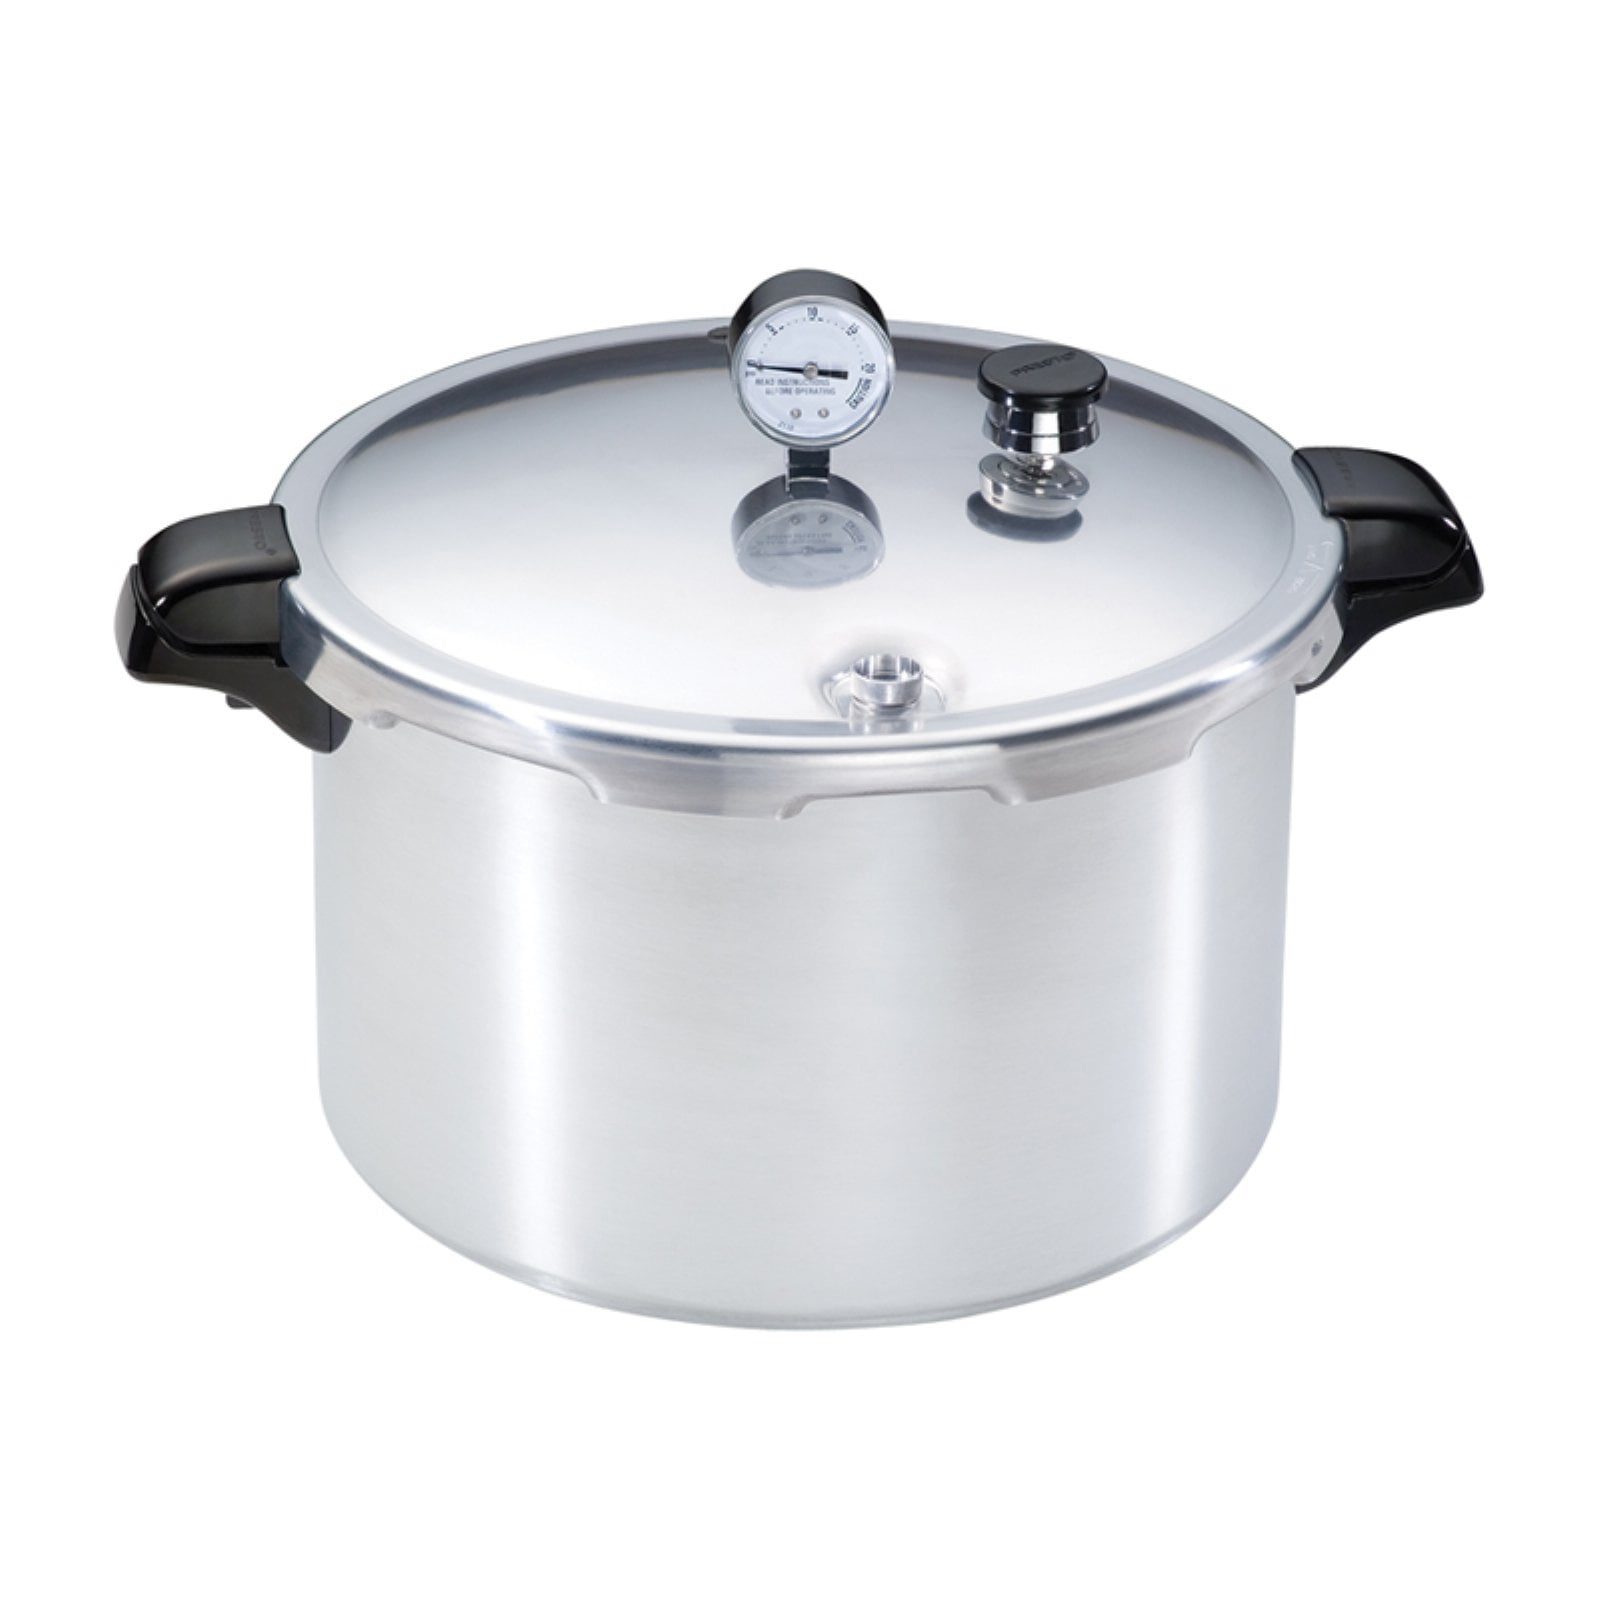 Details about   Presto  16-Quart Pressure Canner and Cooker 